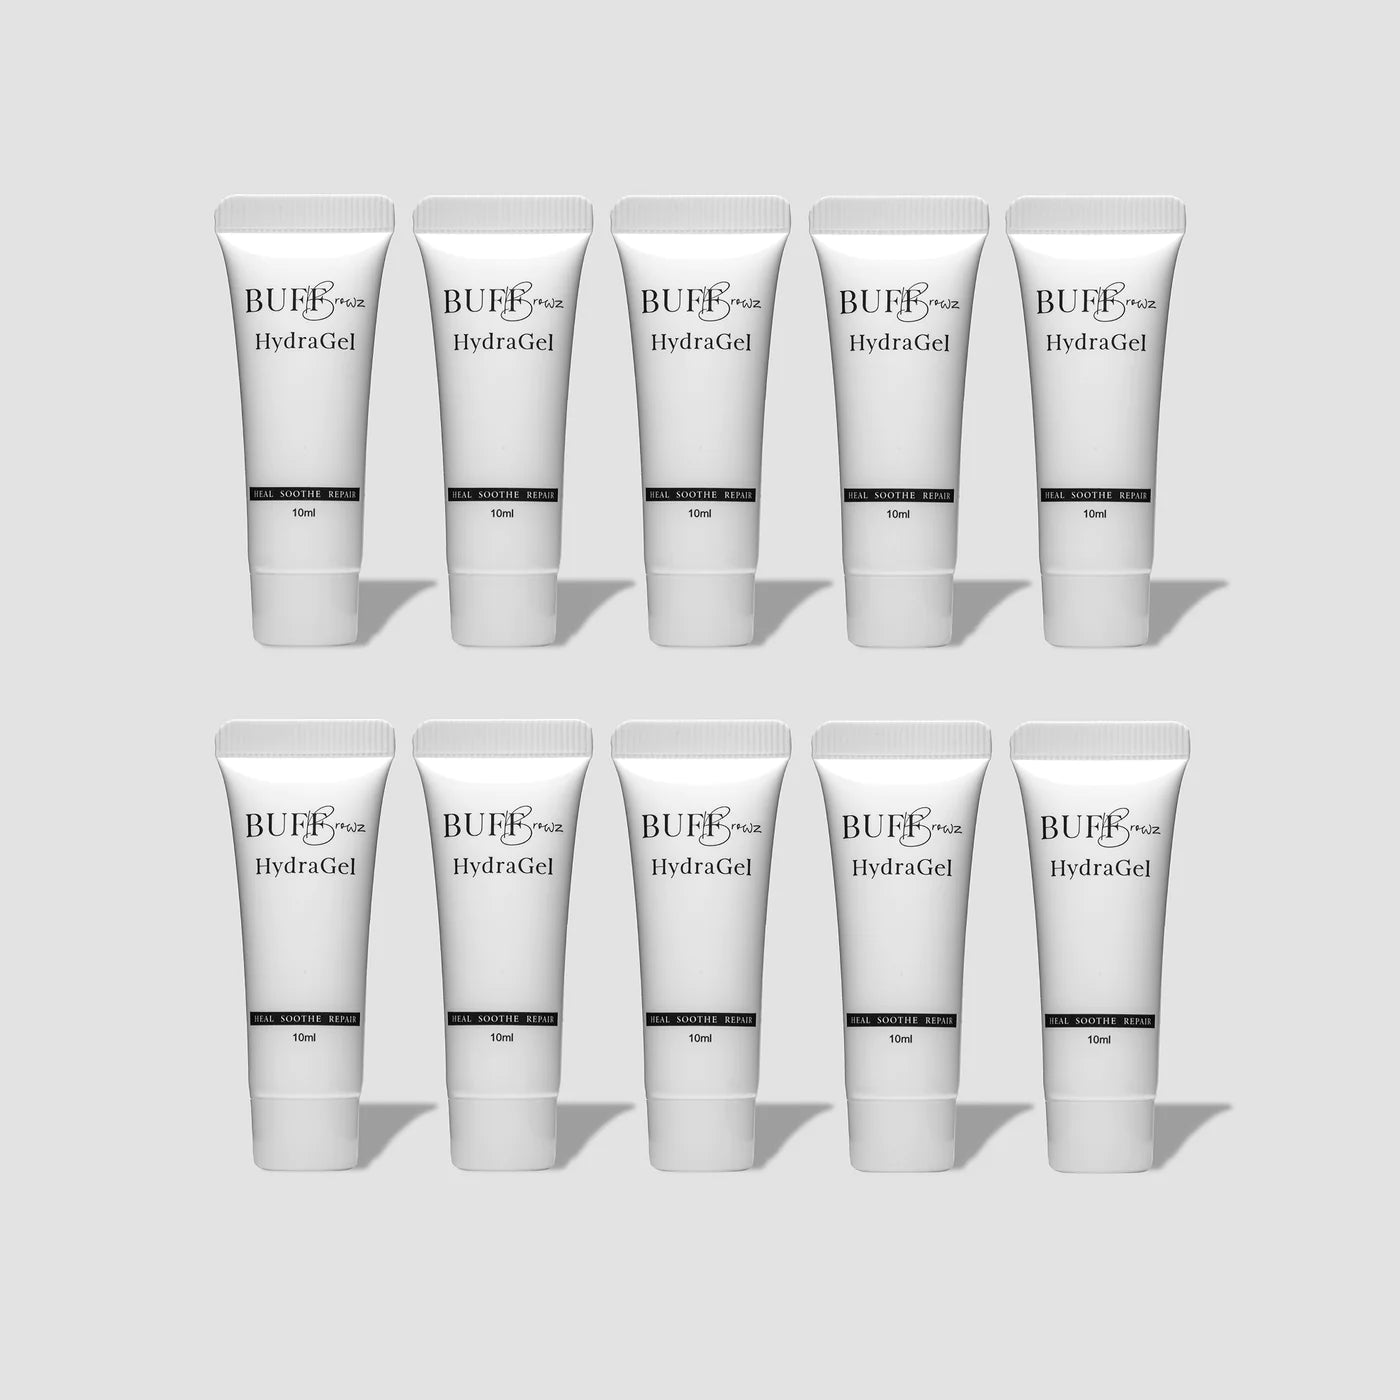 BUFF BROWZ - HydraGel Aftercare Client Size 10ml (10 Pack)